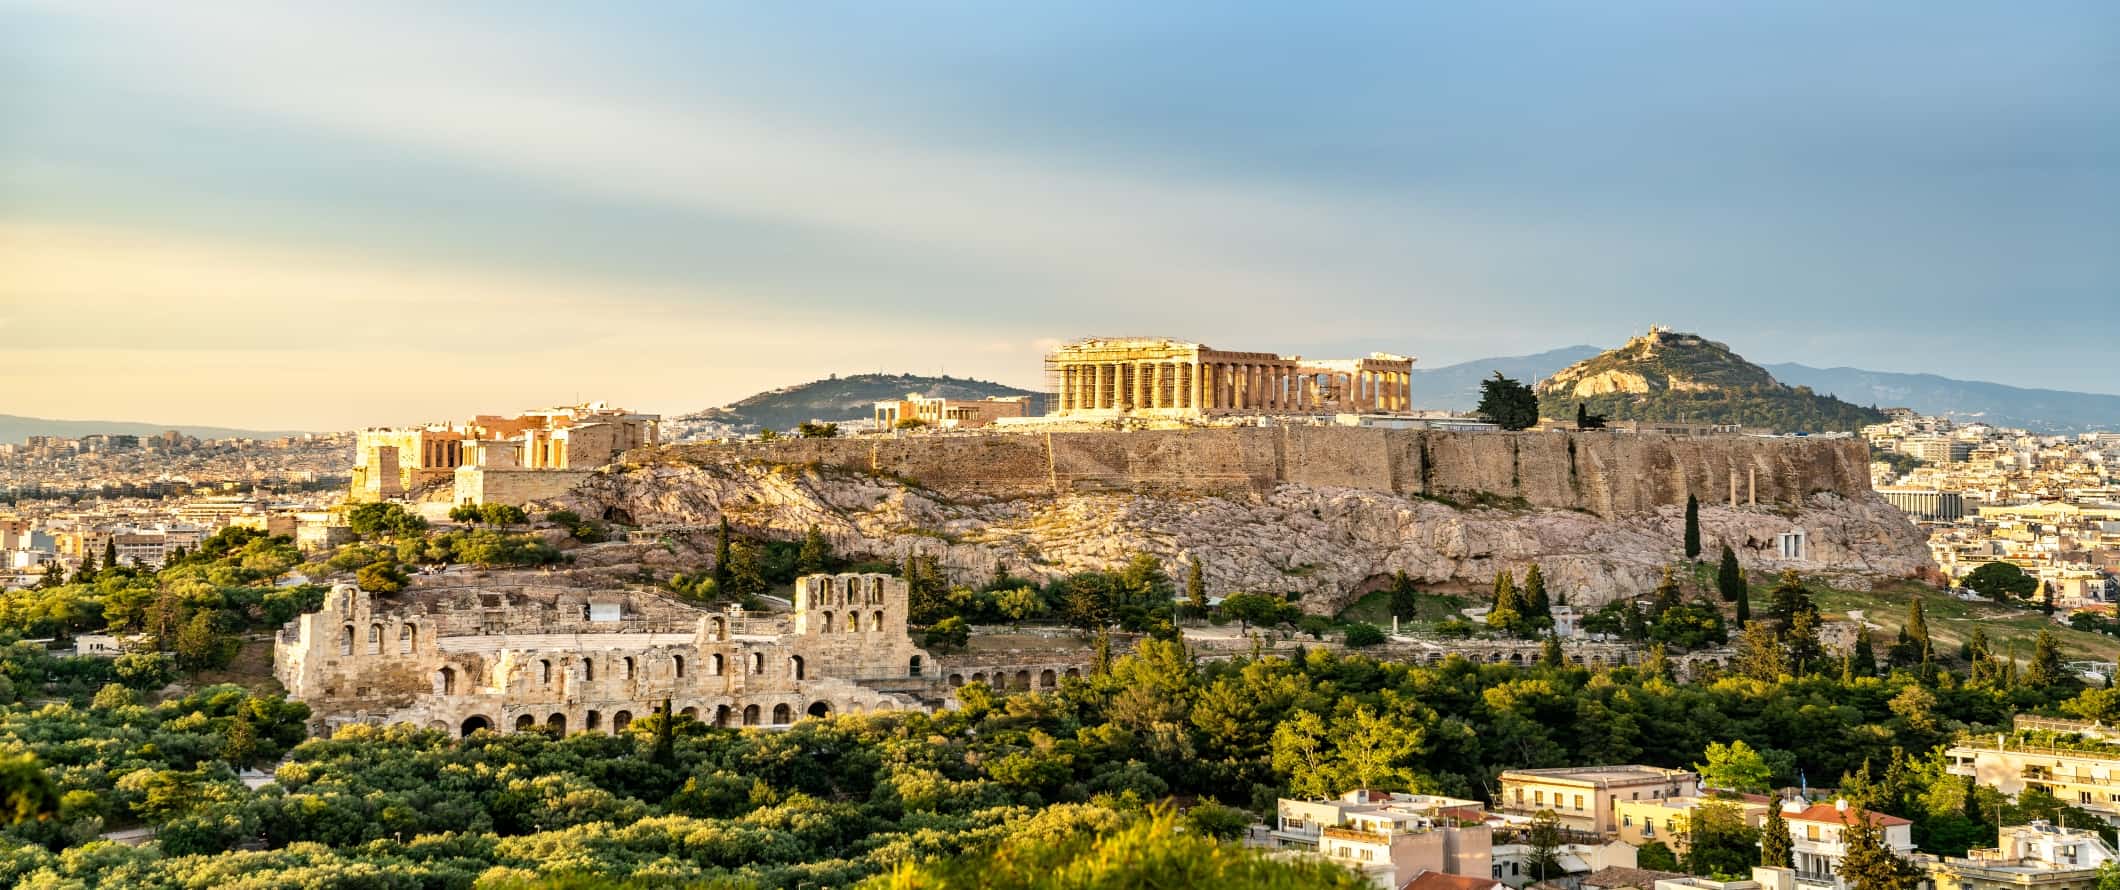 Panoramic view of the Acropolis on a hill with other historical ruins around in Athens, Greece